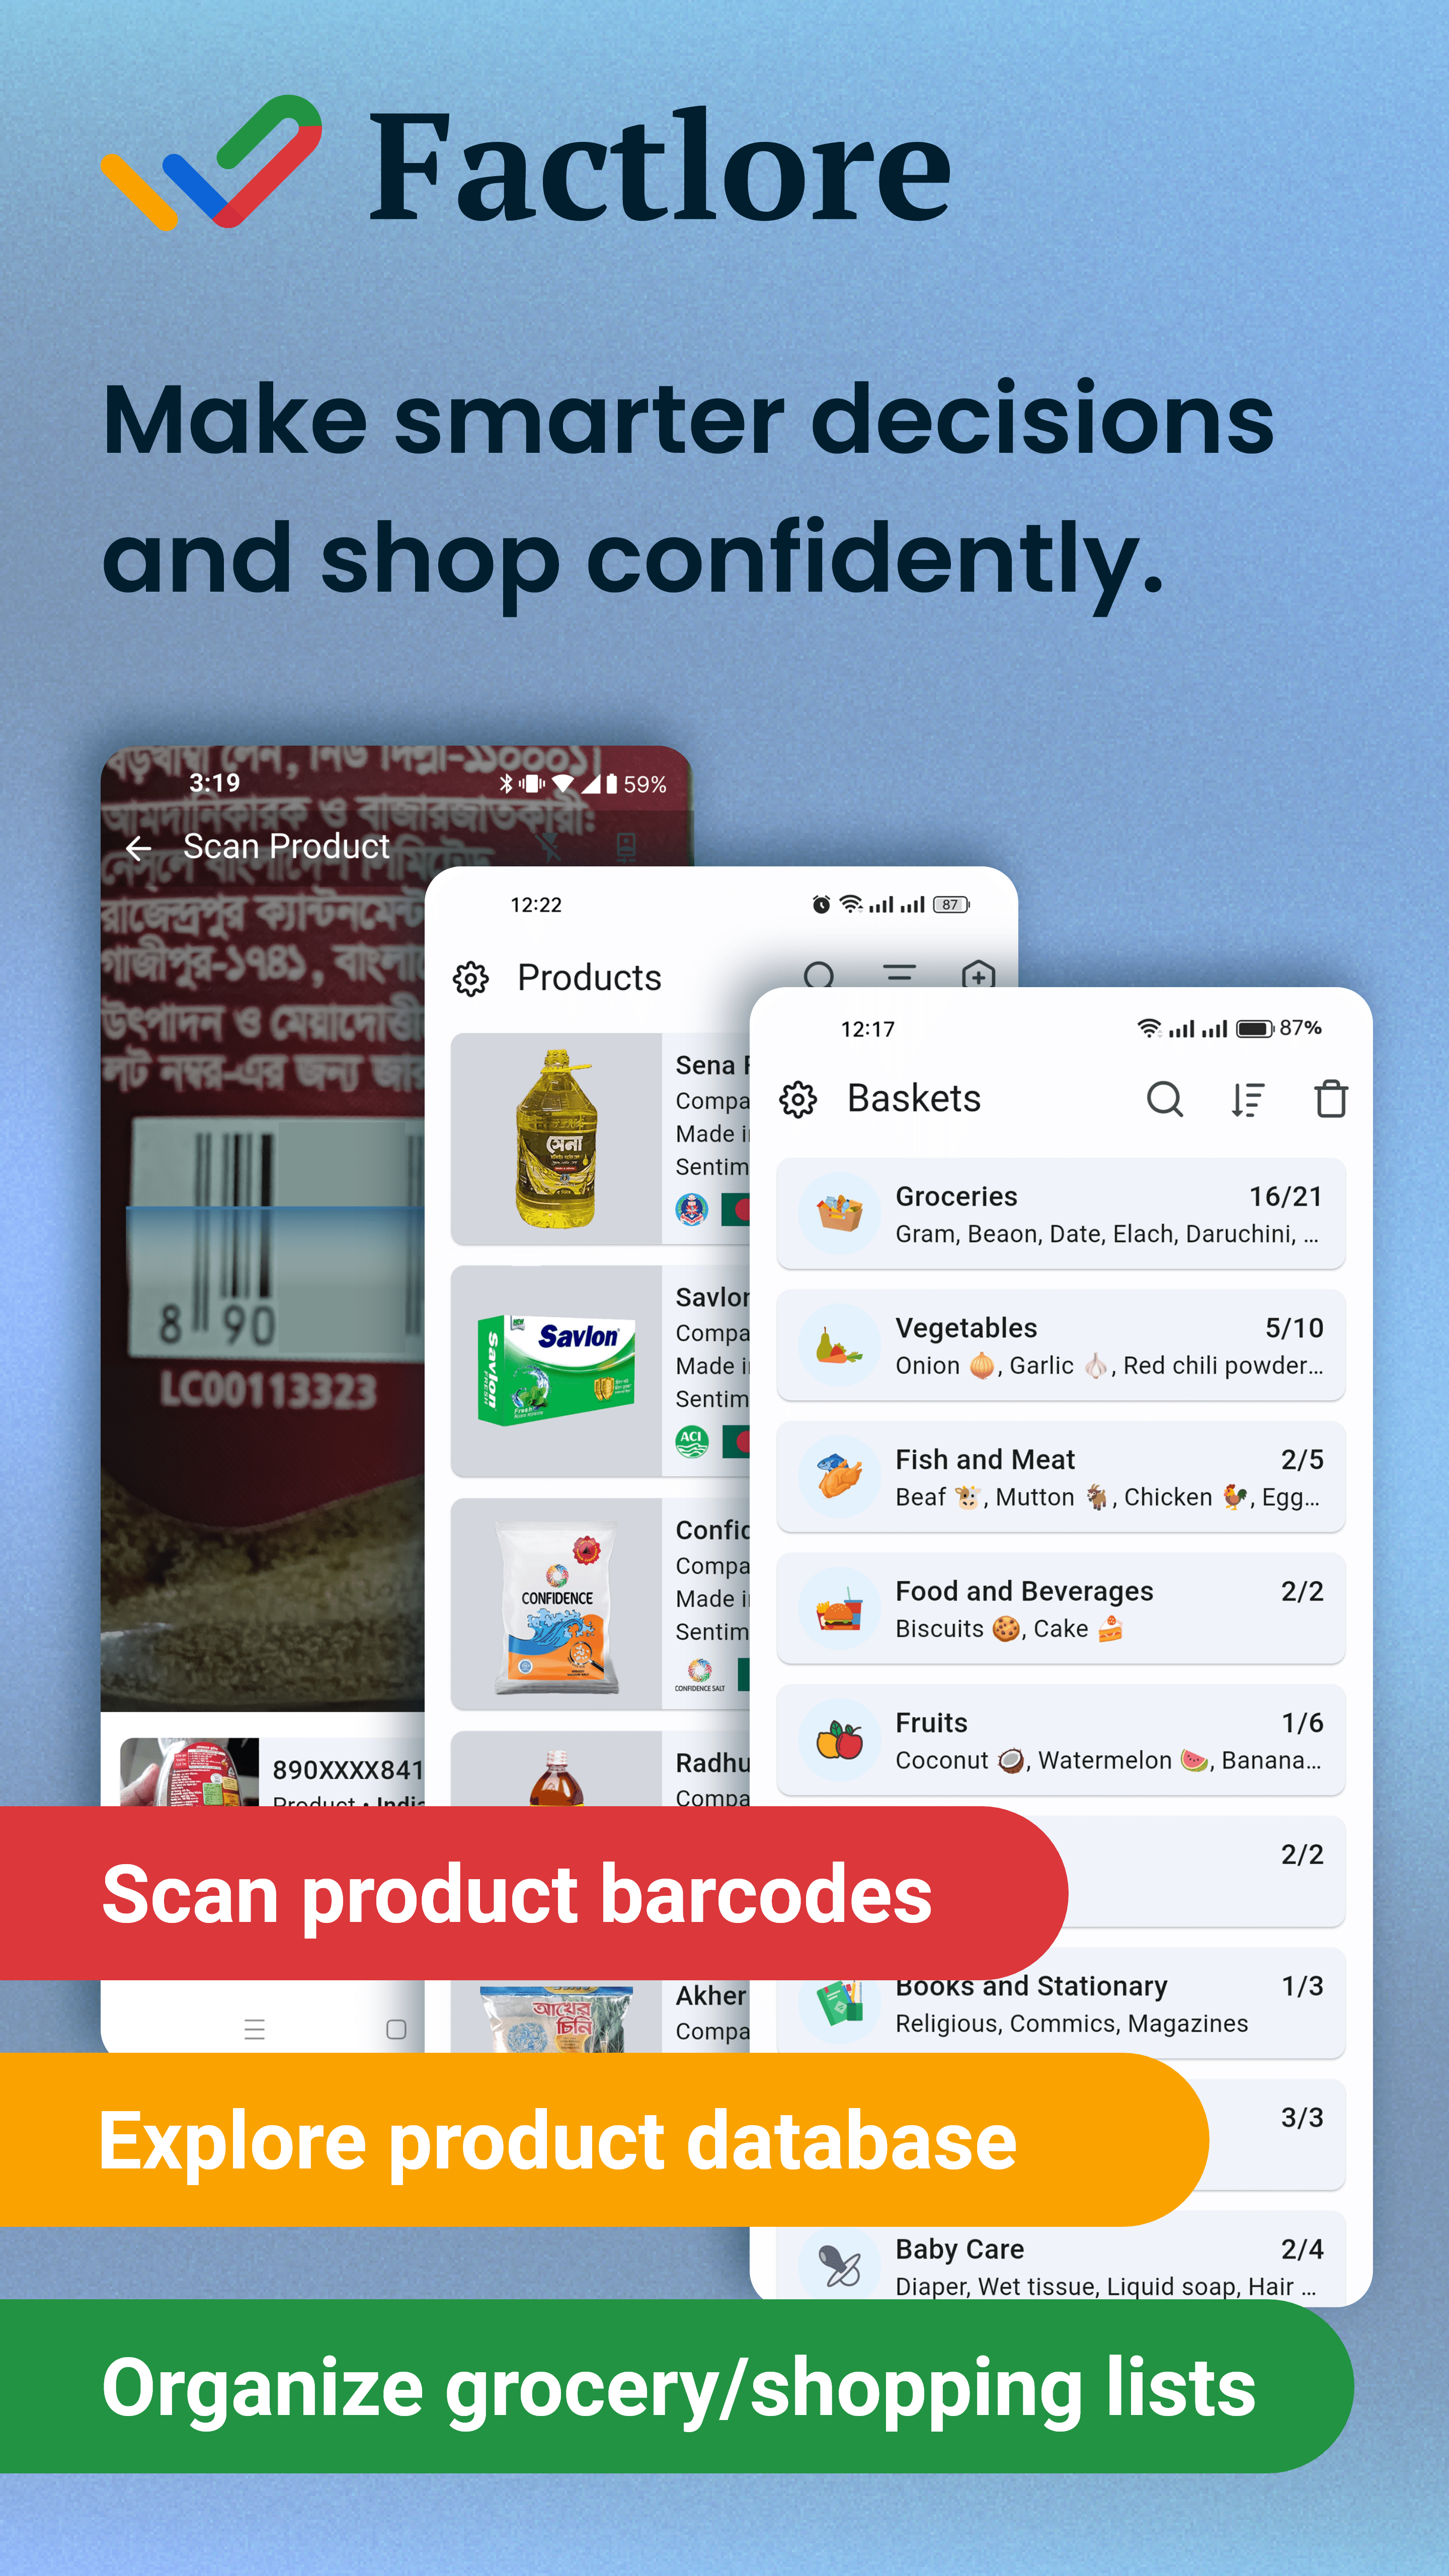 Scan product barcodes to uncover information.